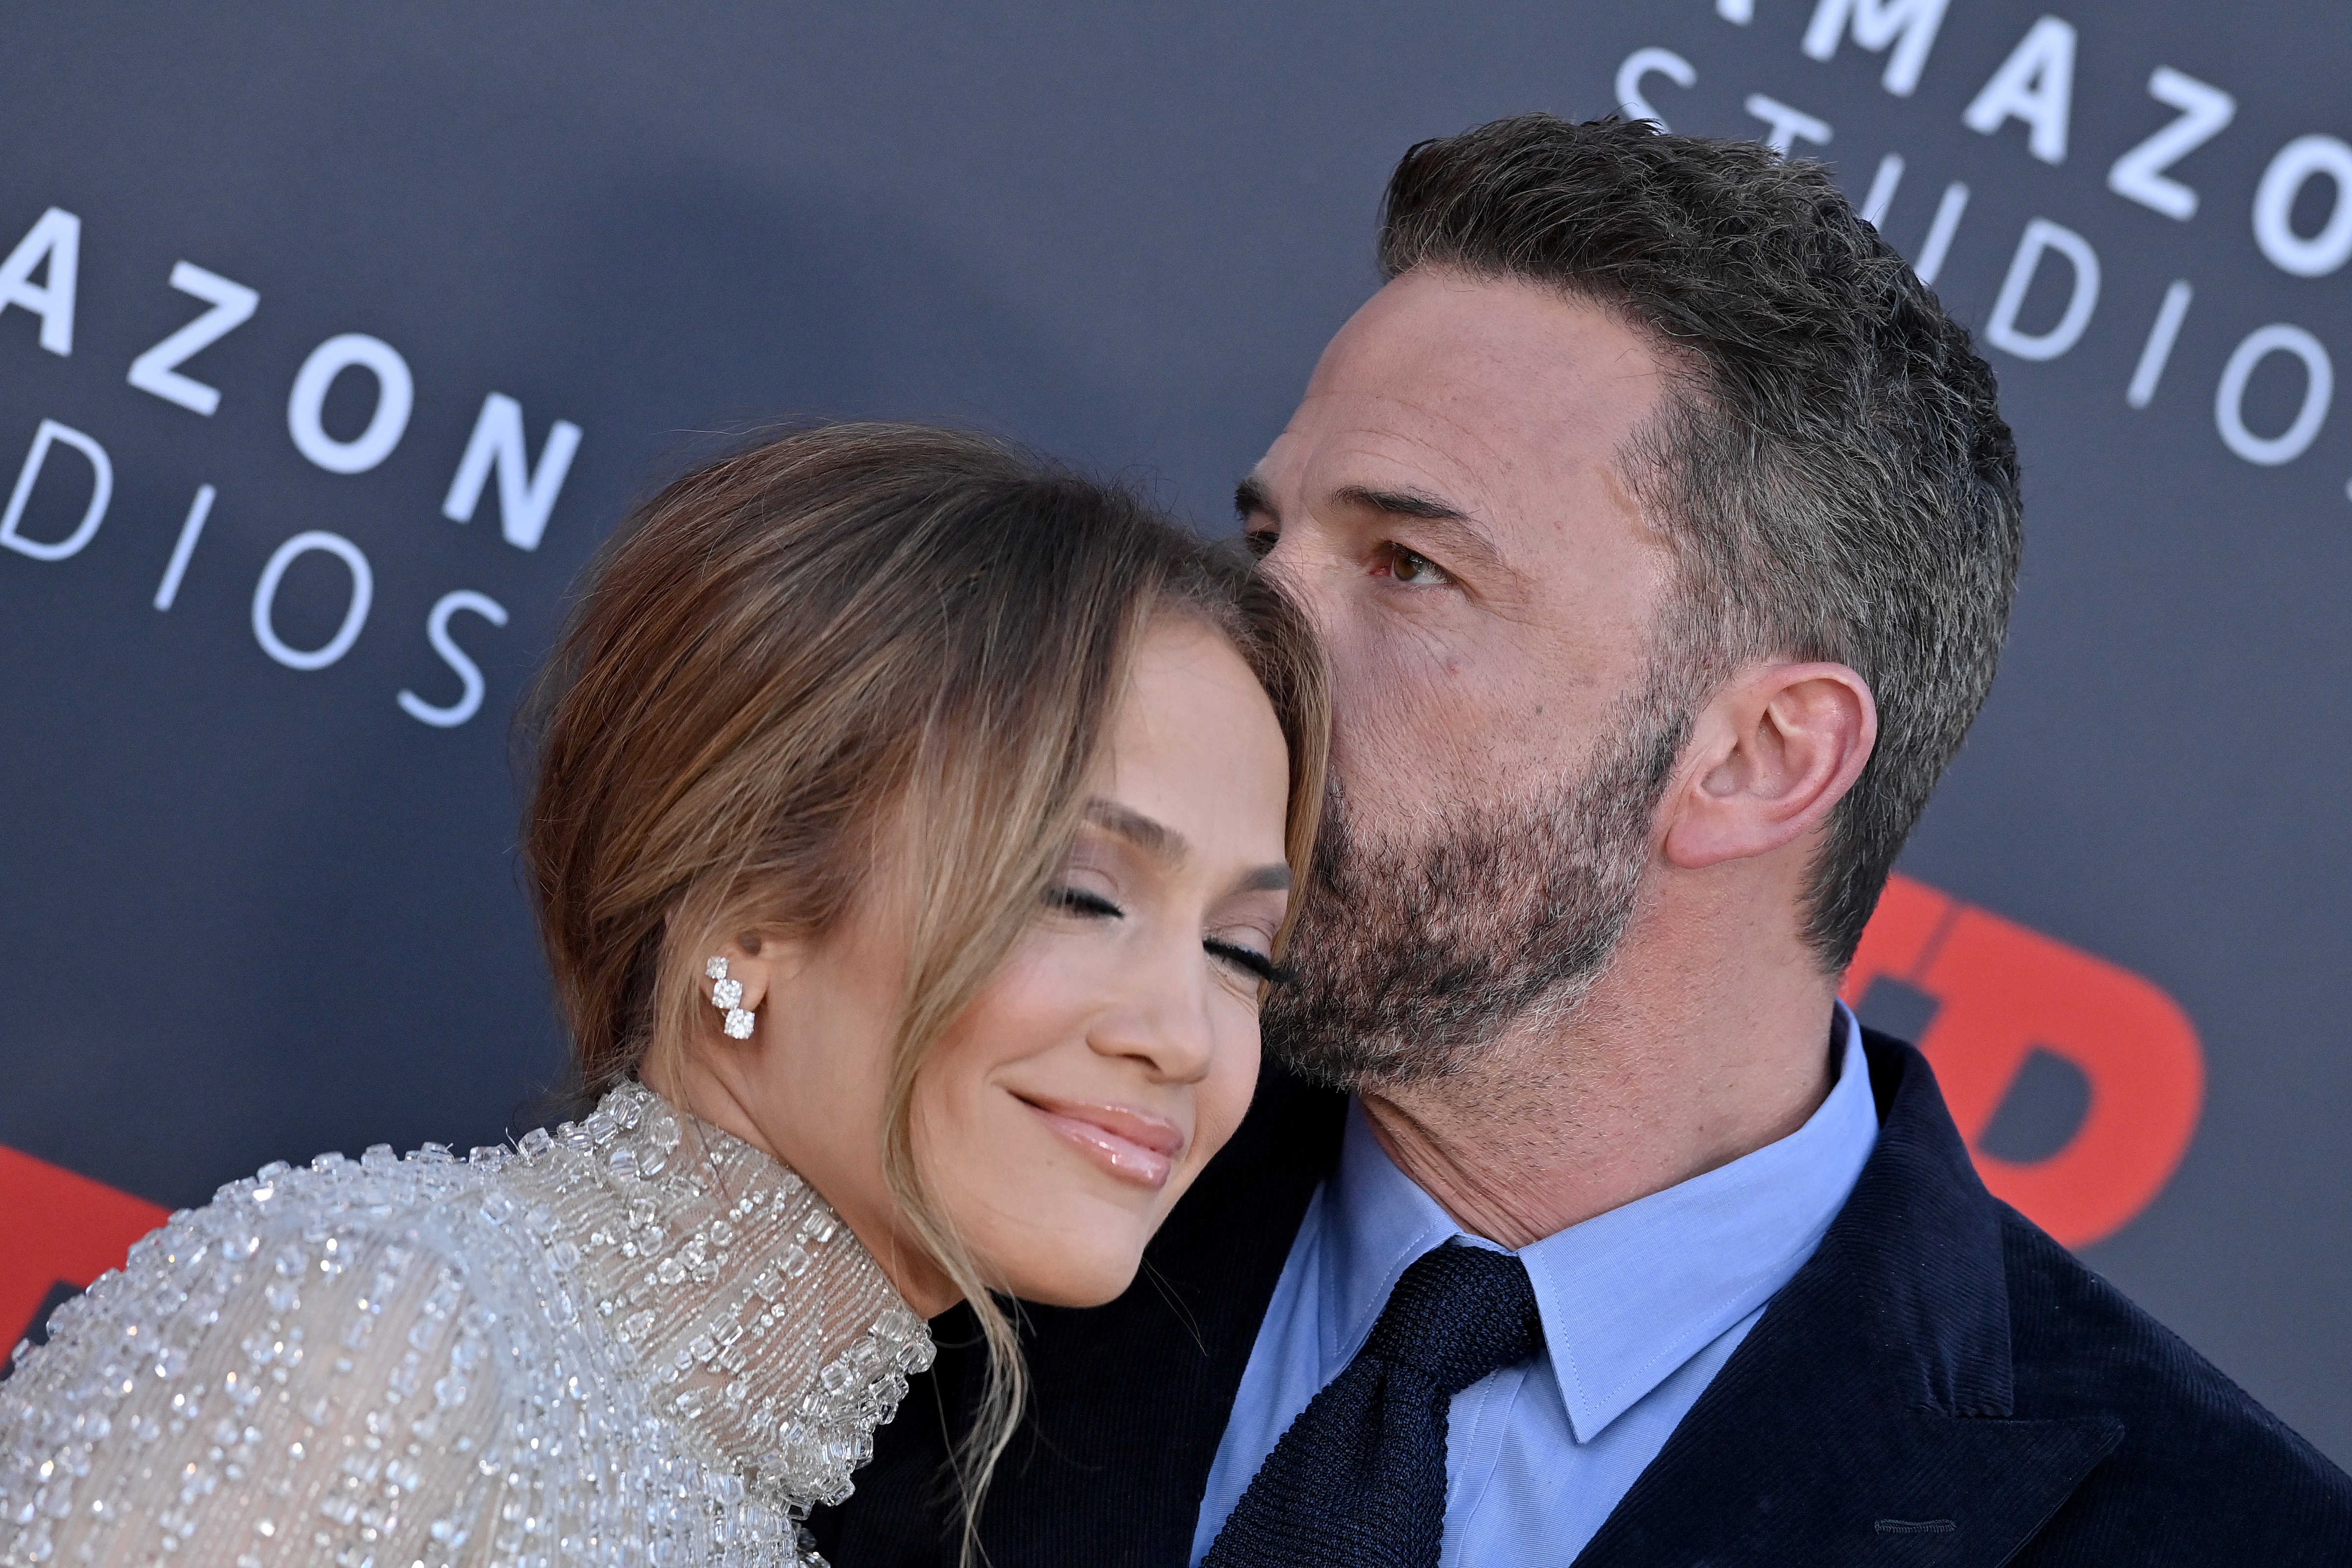 Jennifer Lopez and Ben Affleck attend the Amazon Studios' World Premiere of "AIR" at Regency Village Theatre on March 27, 2023 in Los Angeles, California | Source: Getty Images